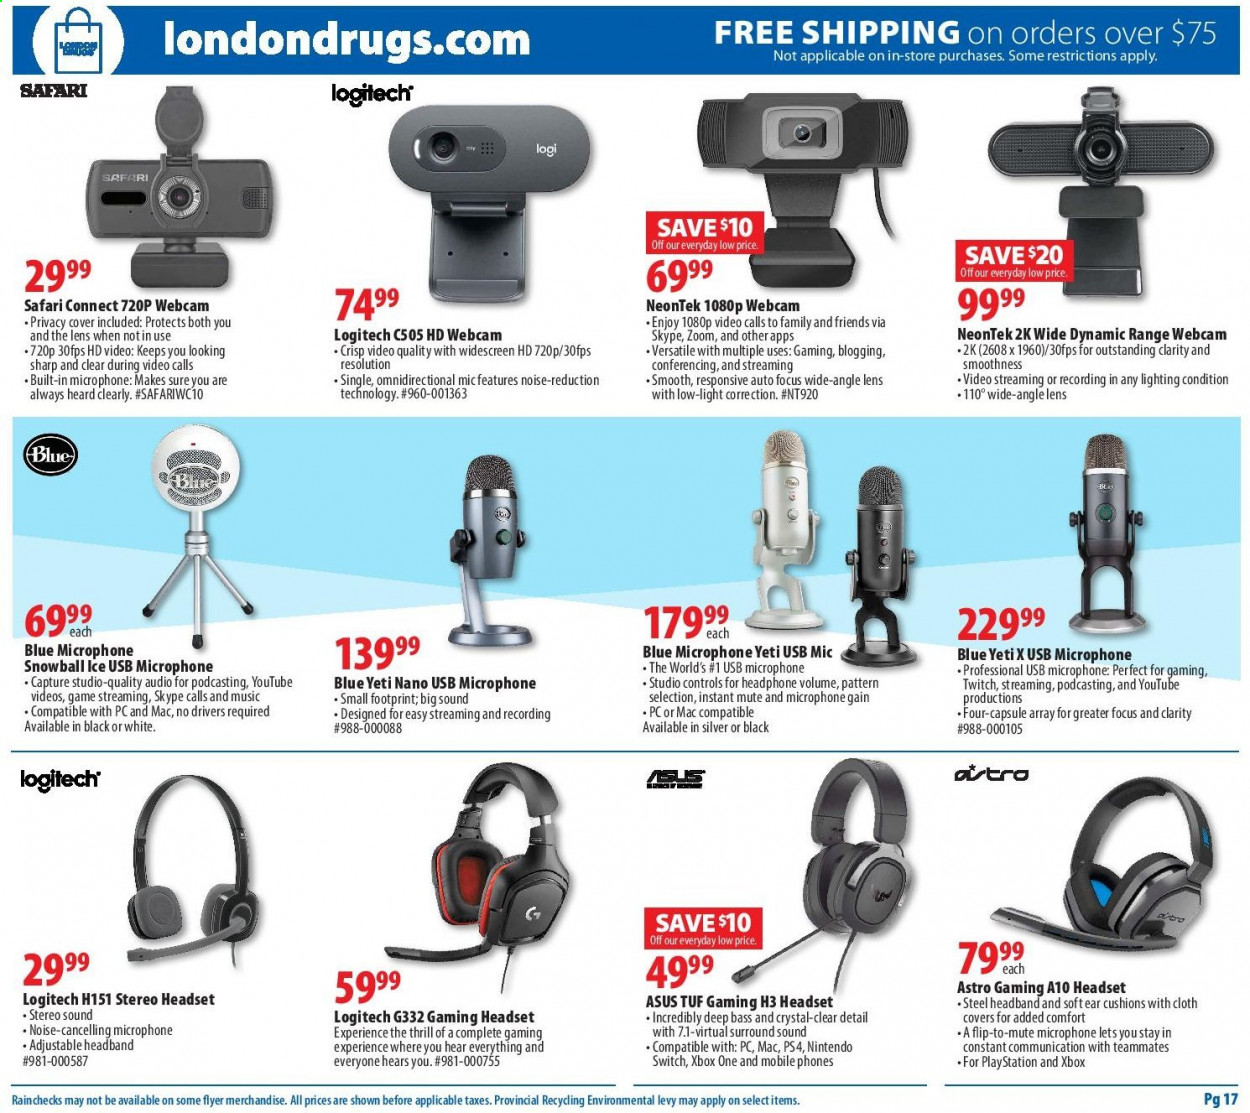 thumbnail - London Drugs Flyer - February 11, 2021 - February 17, 2021 - Sales products - Astro Gaming, gaming headset, Nintendo Switch, Gain, Sure, Sharp, cushion, webcam, Logitech, PlayStation, PlayStation 4, lens, headset, headphones, Xbox One. Page 17.